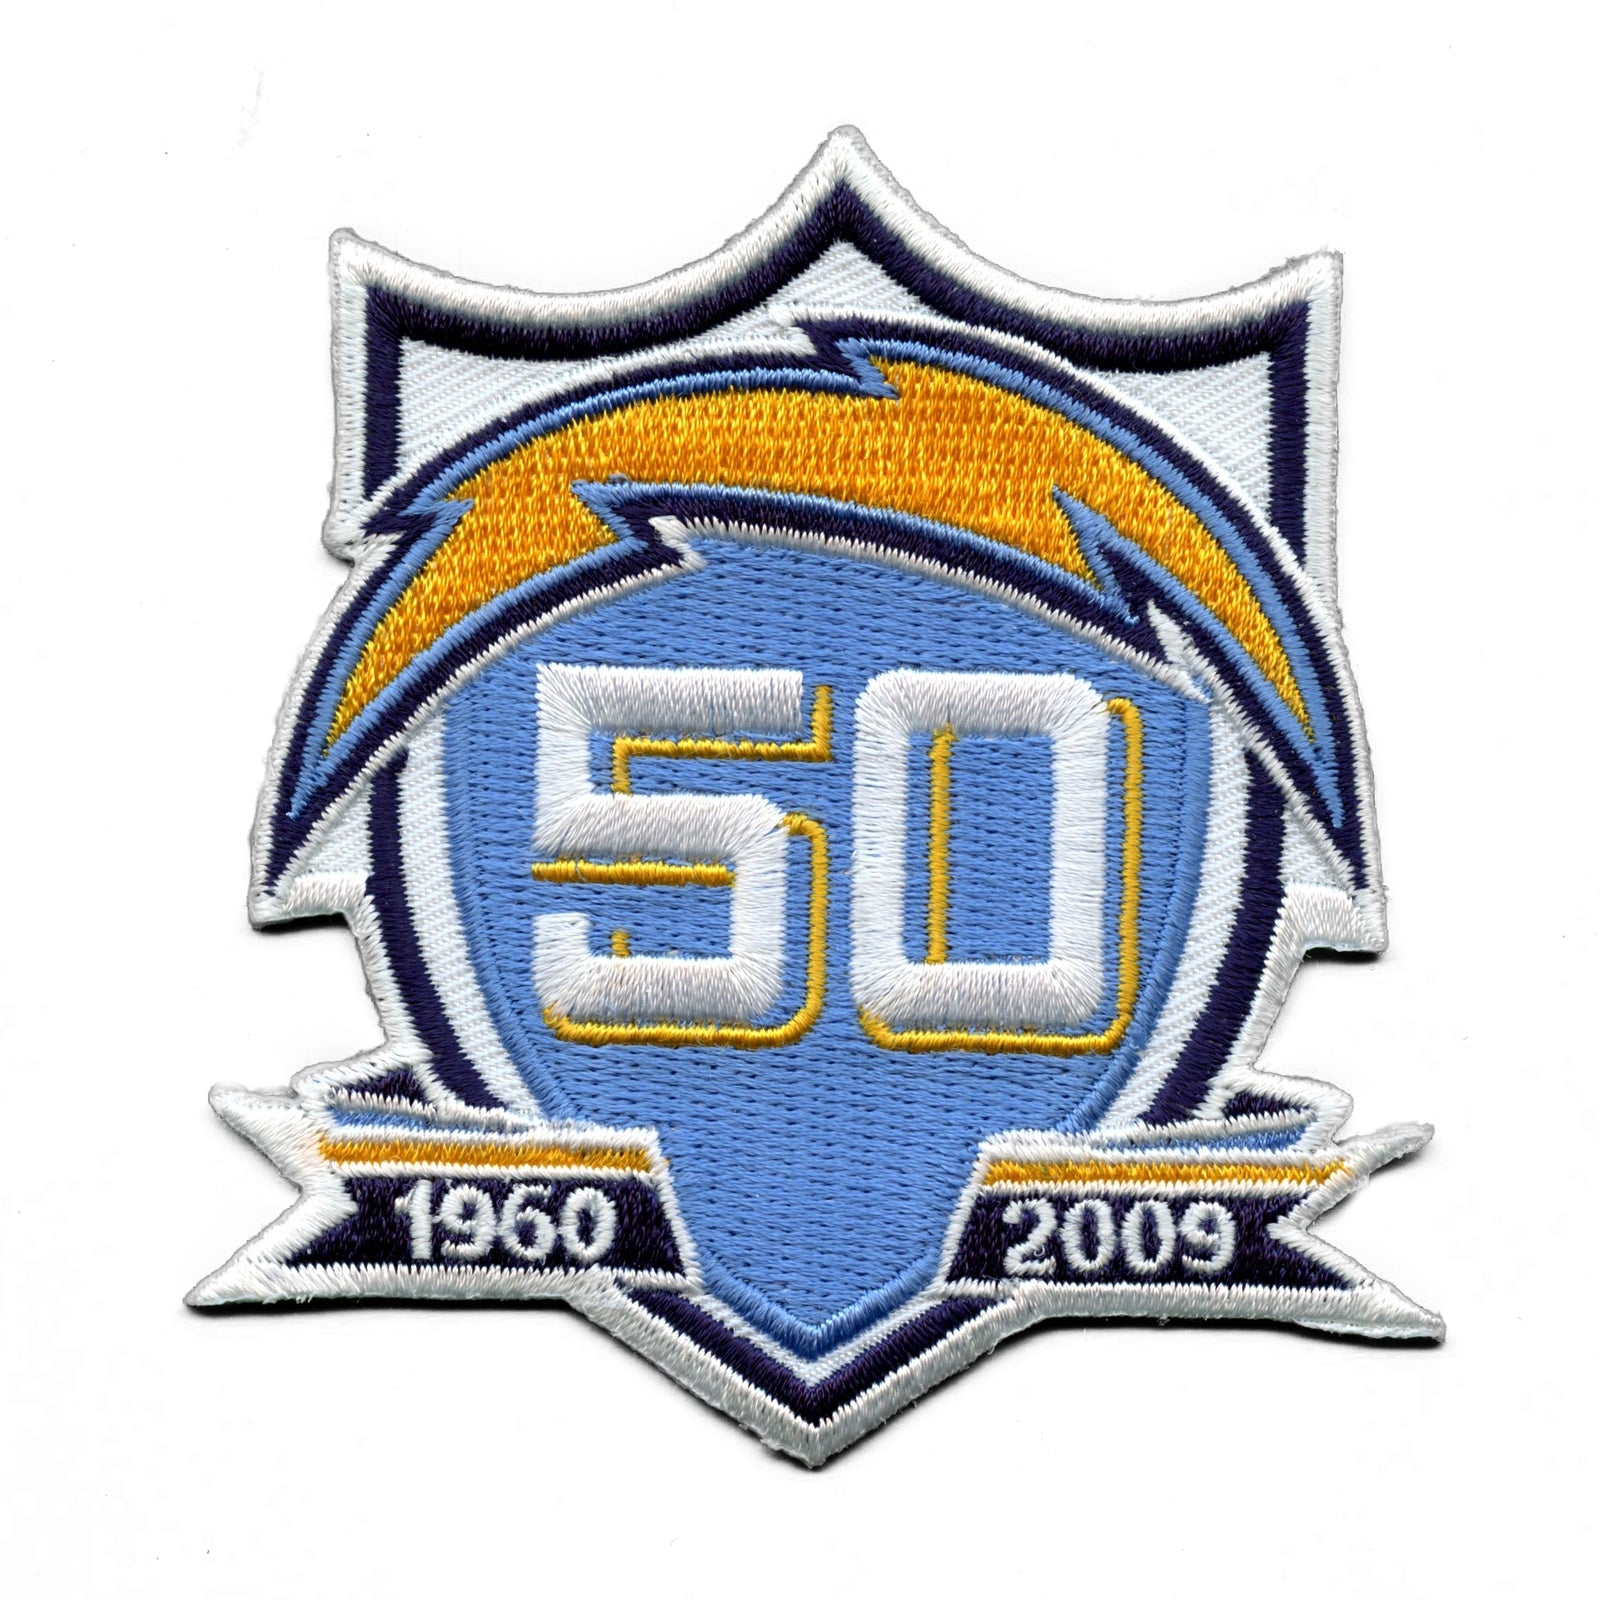 chargers 50th anniversary jersey